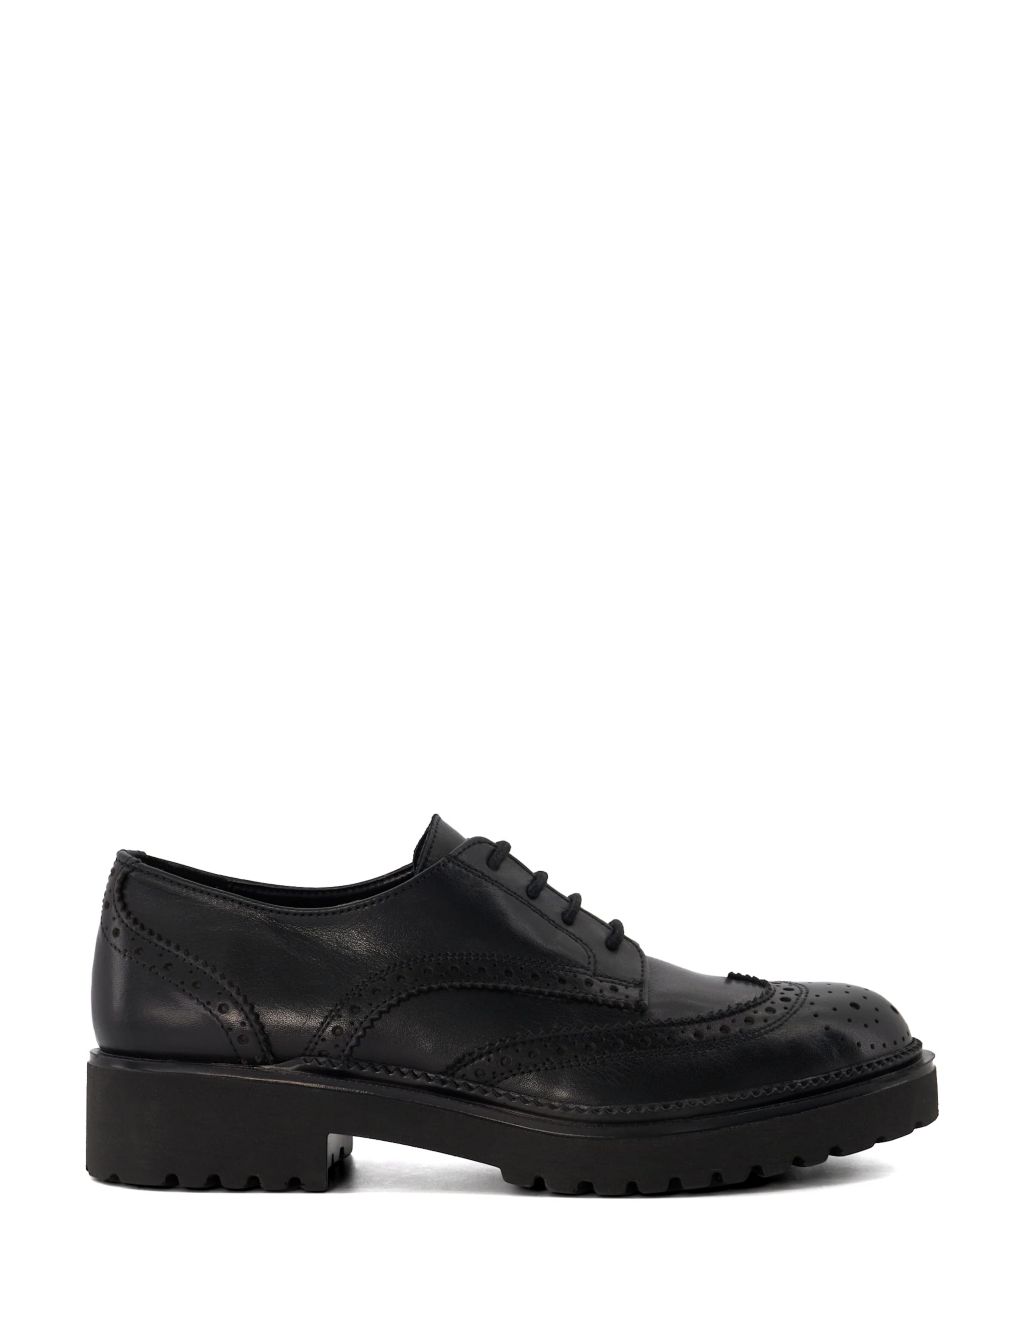 Leather Chunky Lace Up Brogues image 1